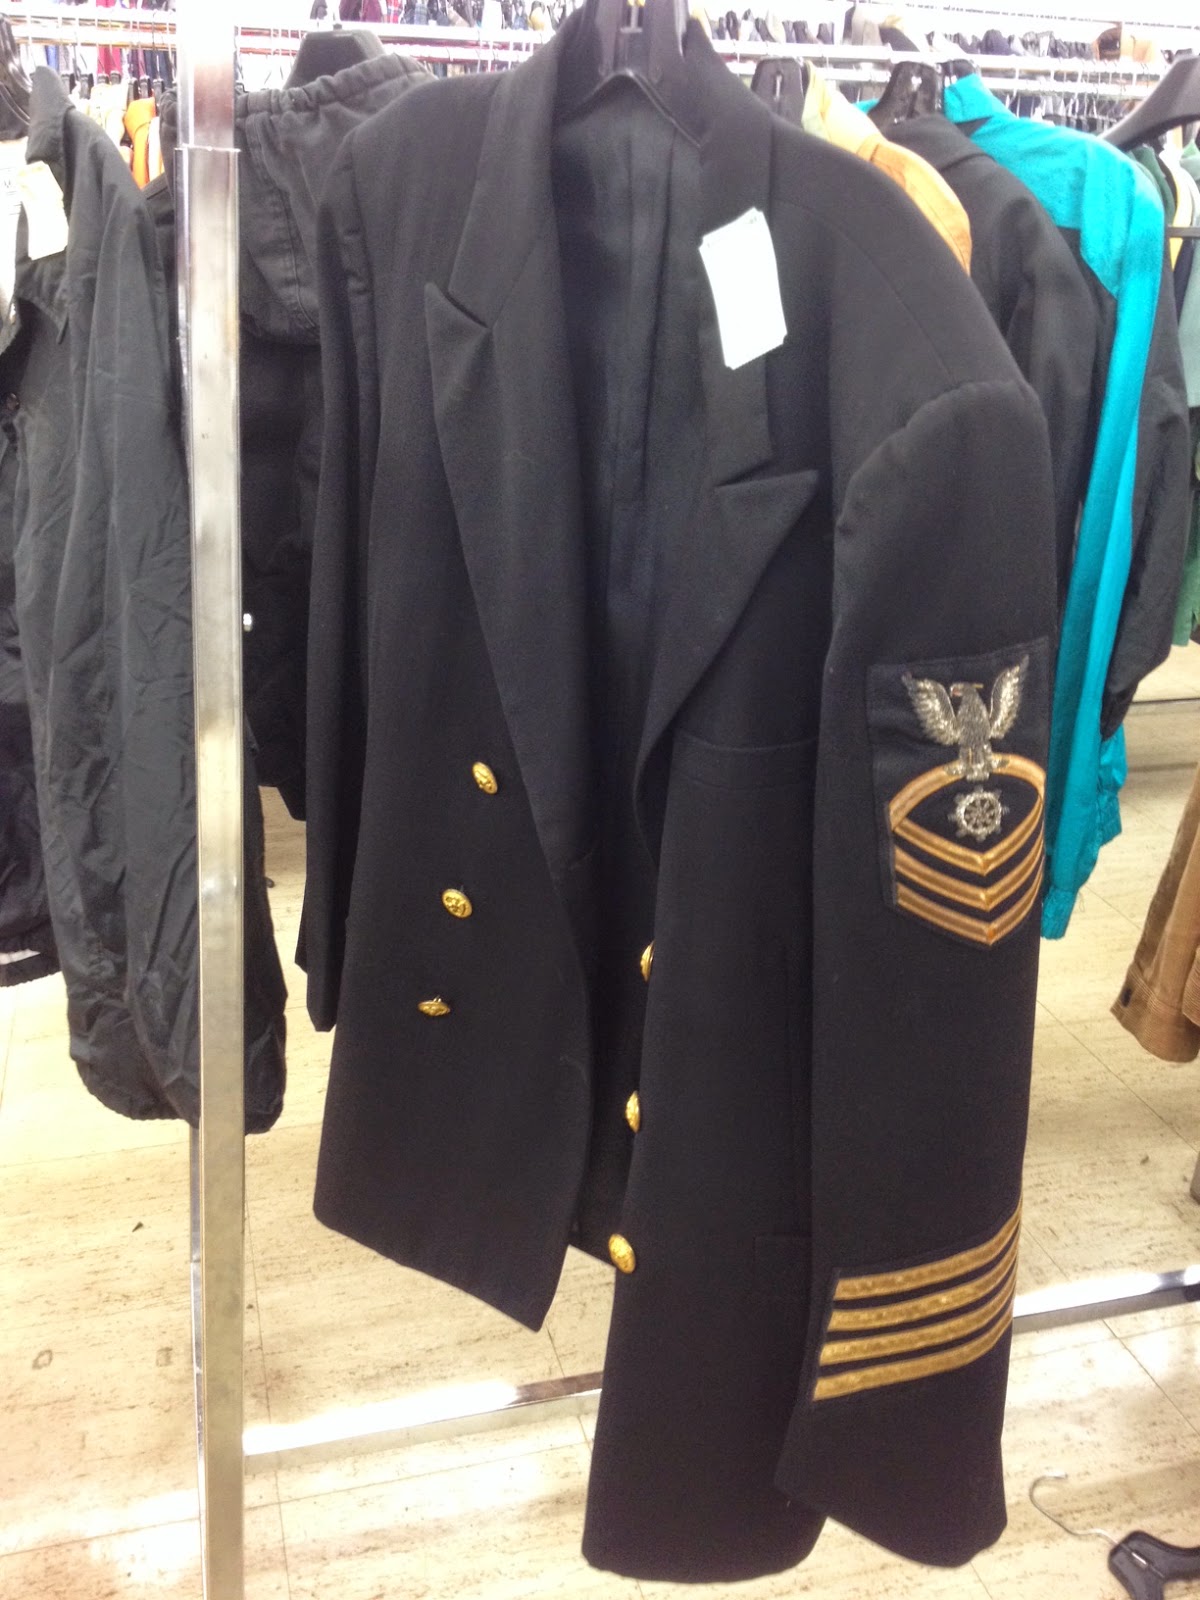 Navy Uniform - Poem #8 for April 2014 Poetry Project